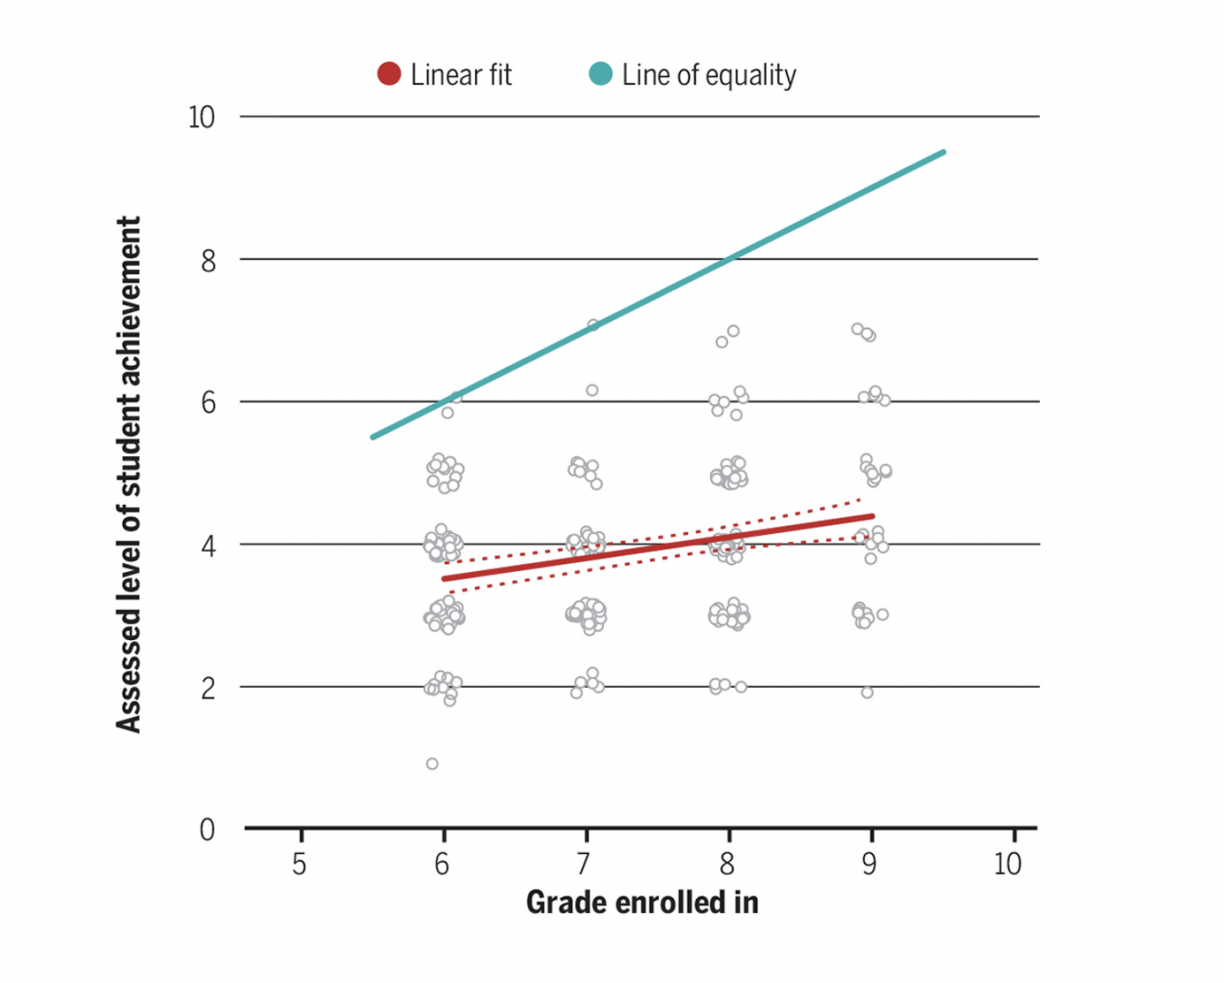 A graph with "grade enrolled in" on the x axis, "assessed level of student achievement" on the y axis, a red "line of linear fit" showing the actual relationship, and a green "line of equality" showing the results that would exist in an equal system